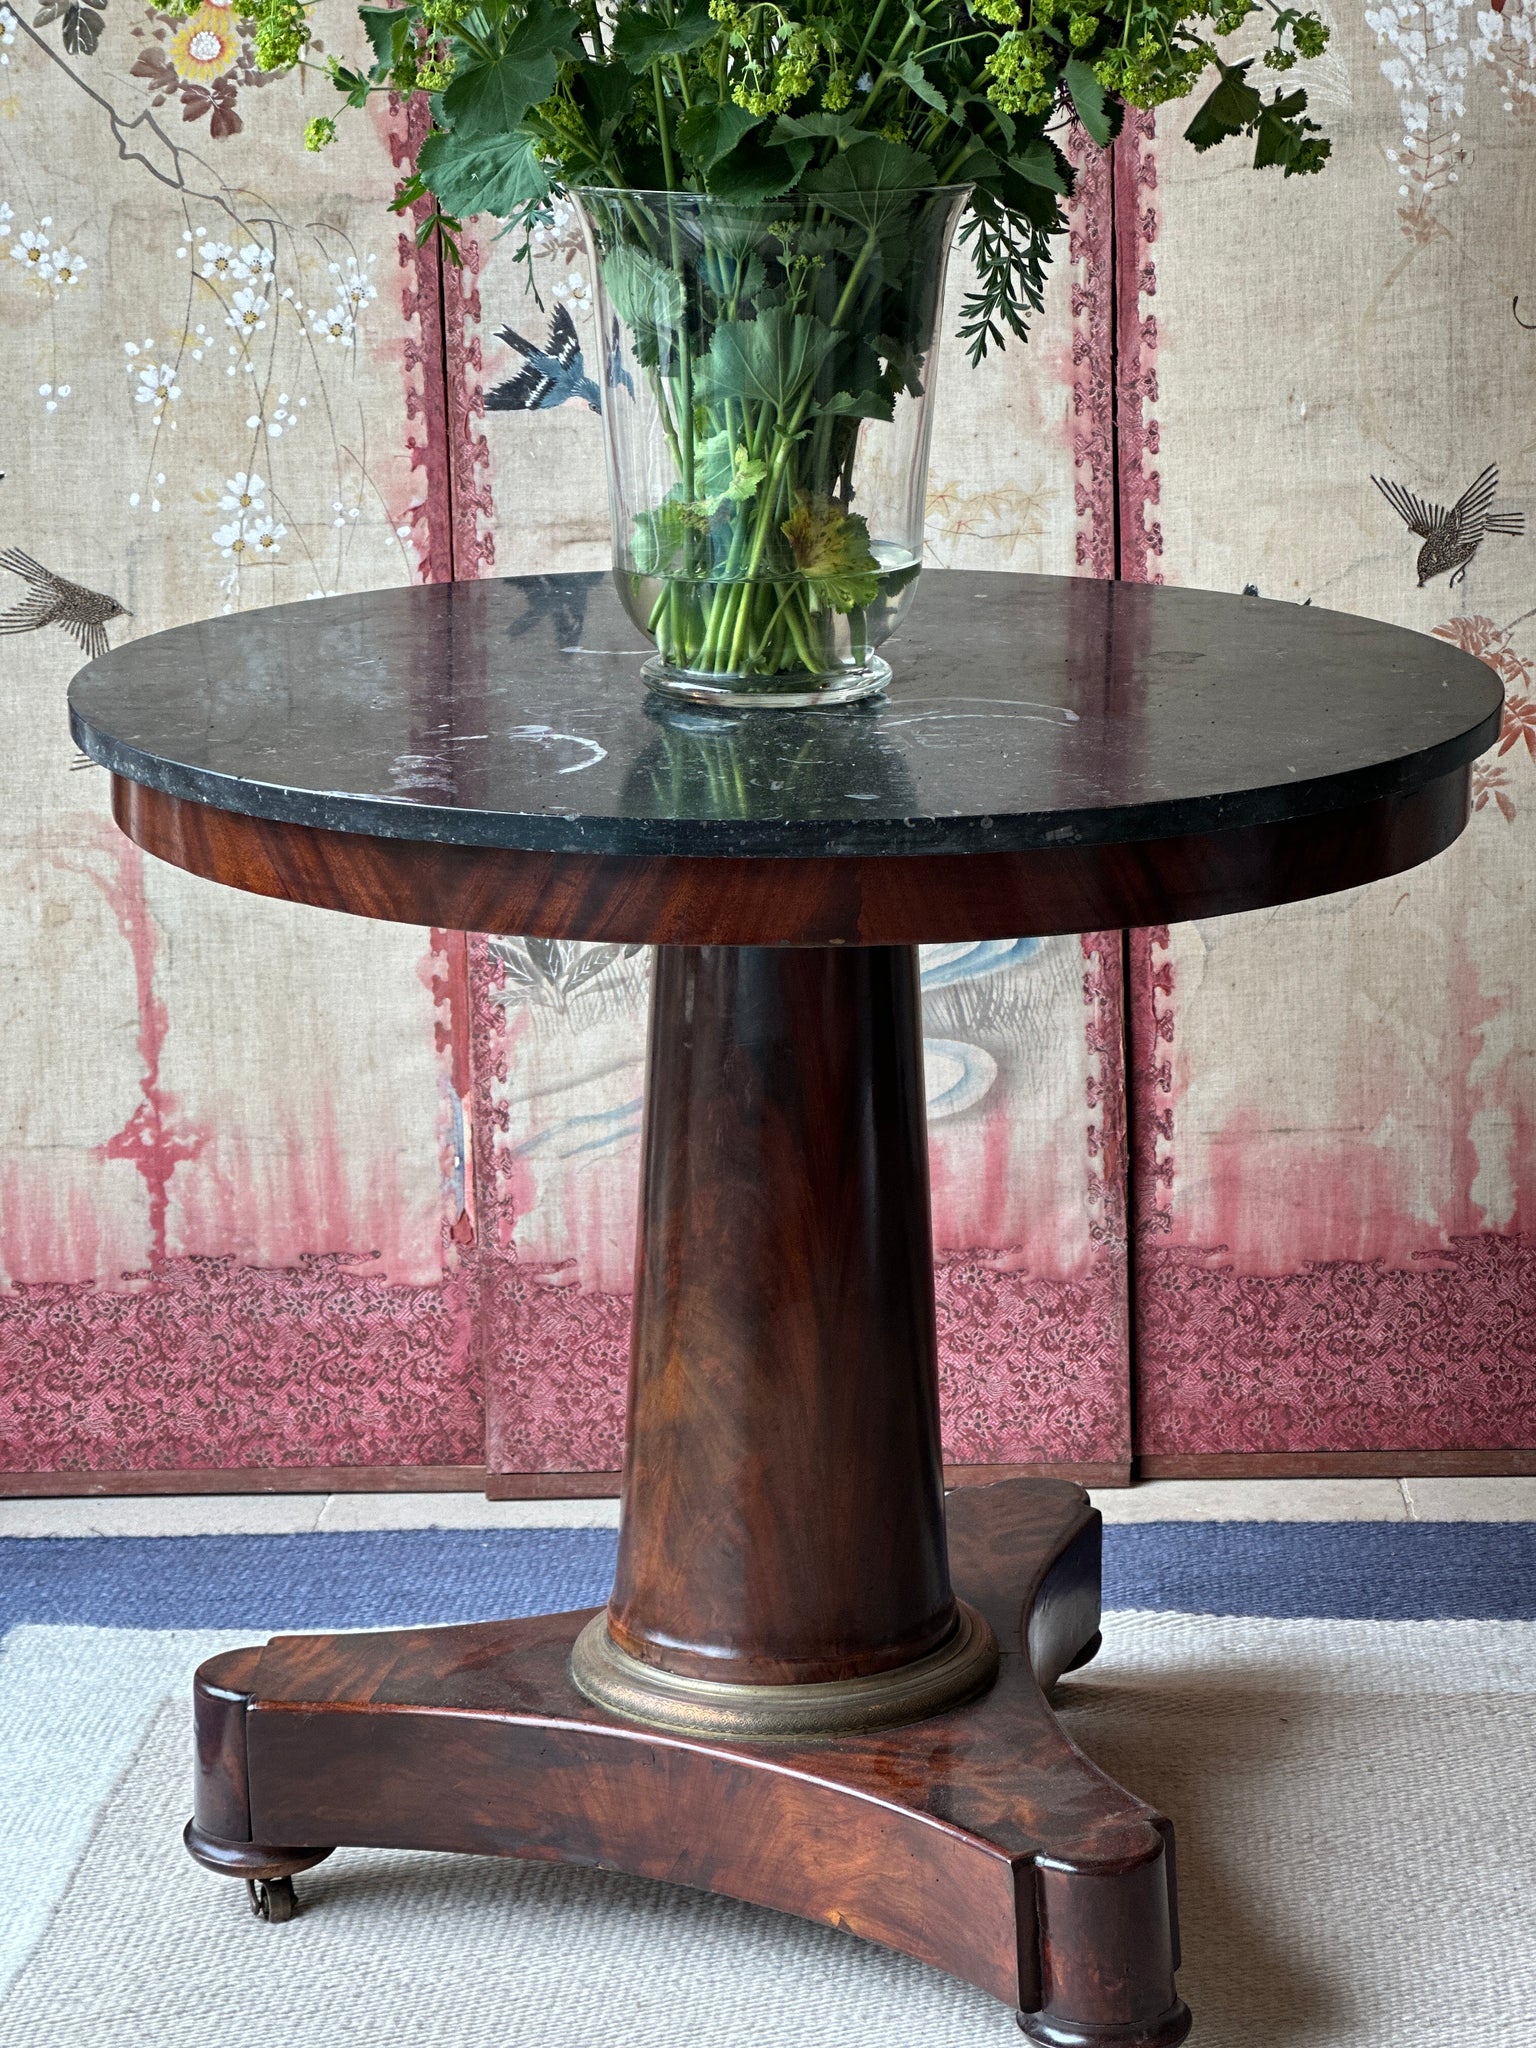 19th Century French Gueridon Table